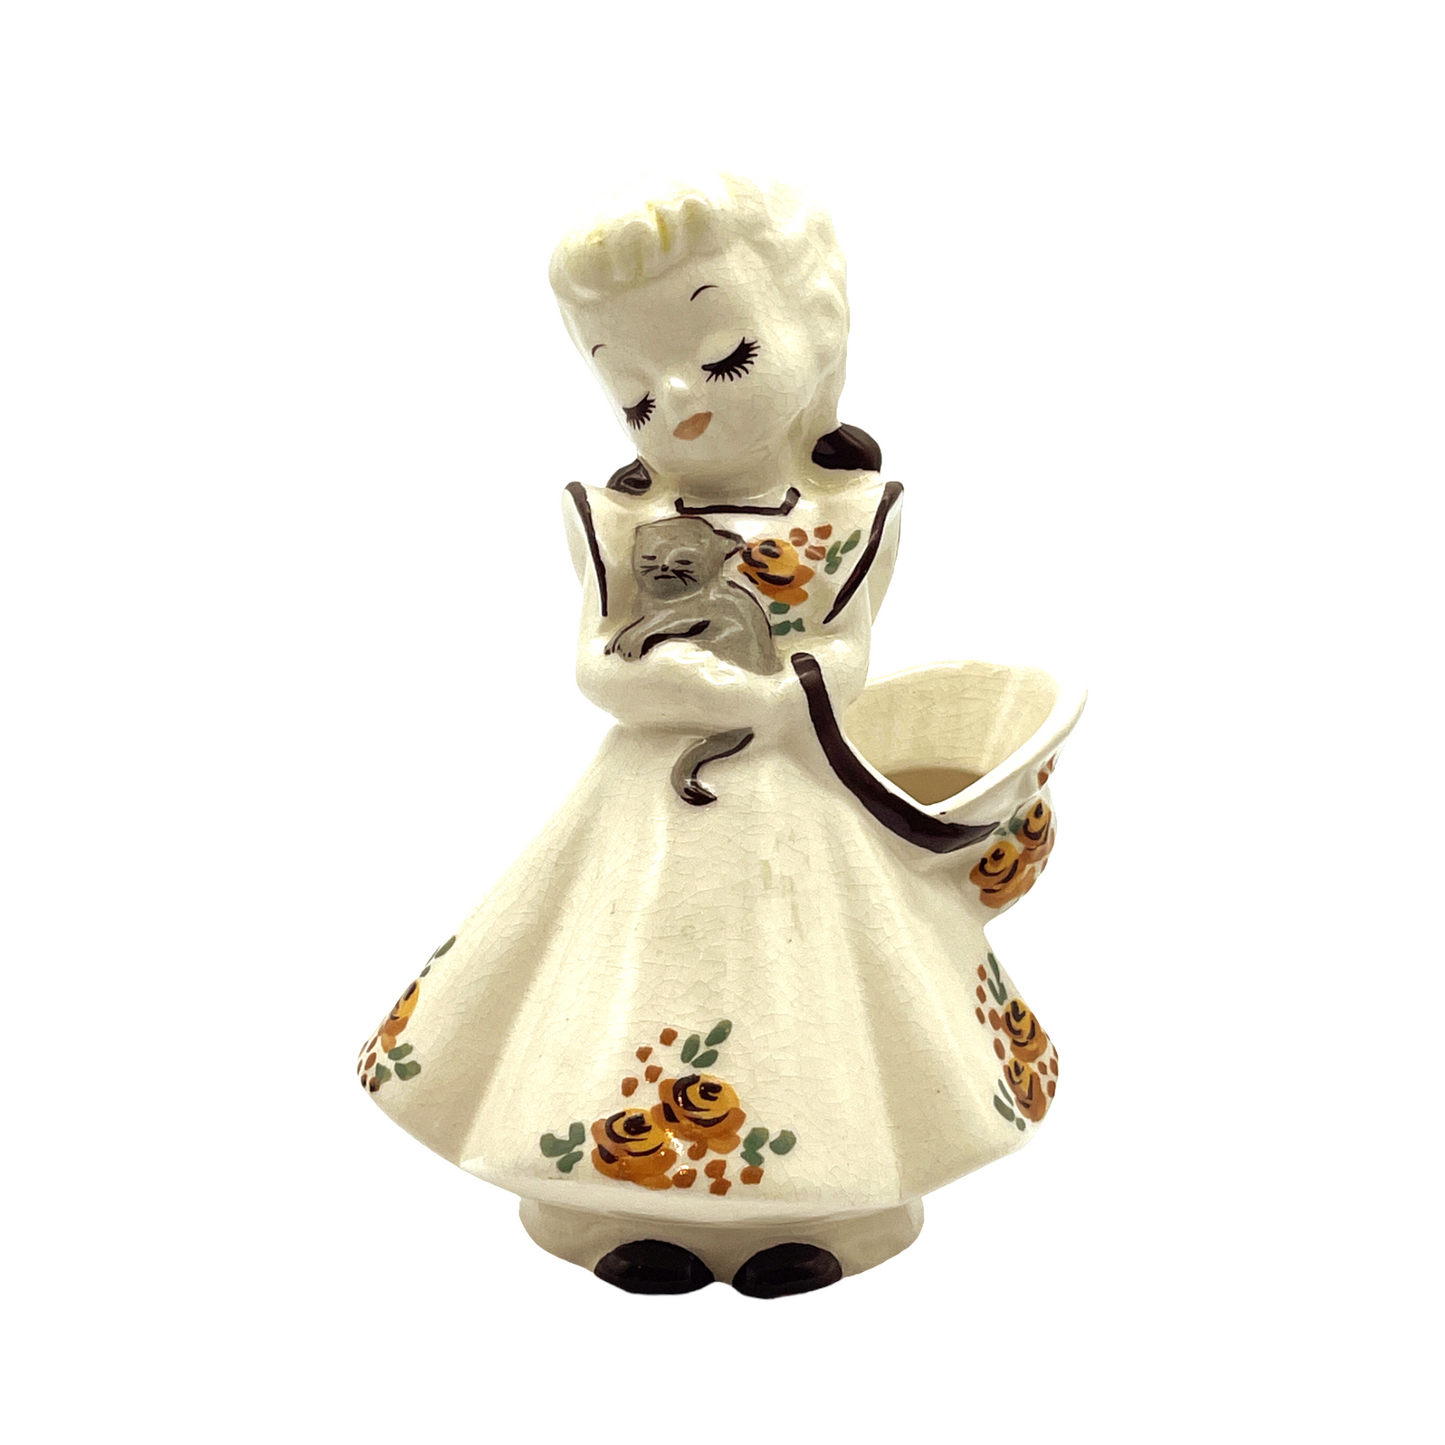 Delee Art - Girl With Grey Cat - Hand Decorated - Vintage - 7.5"